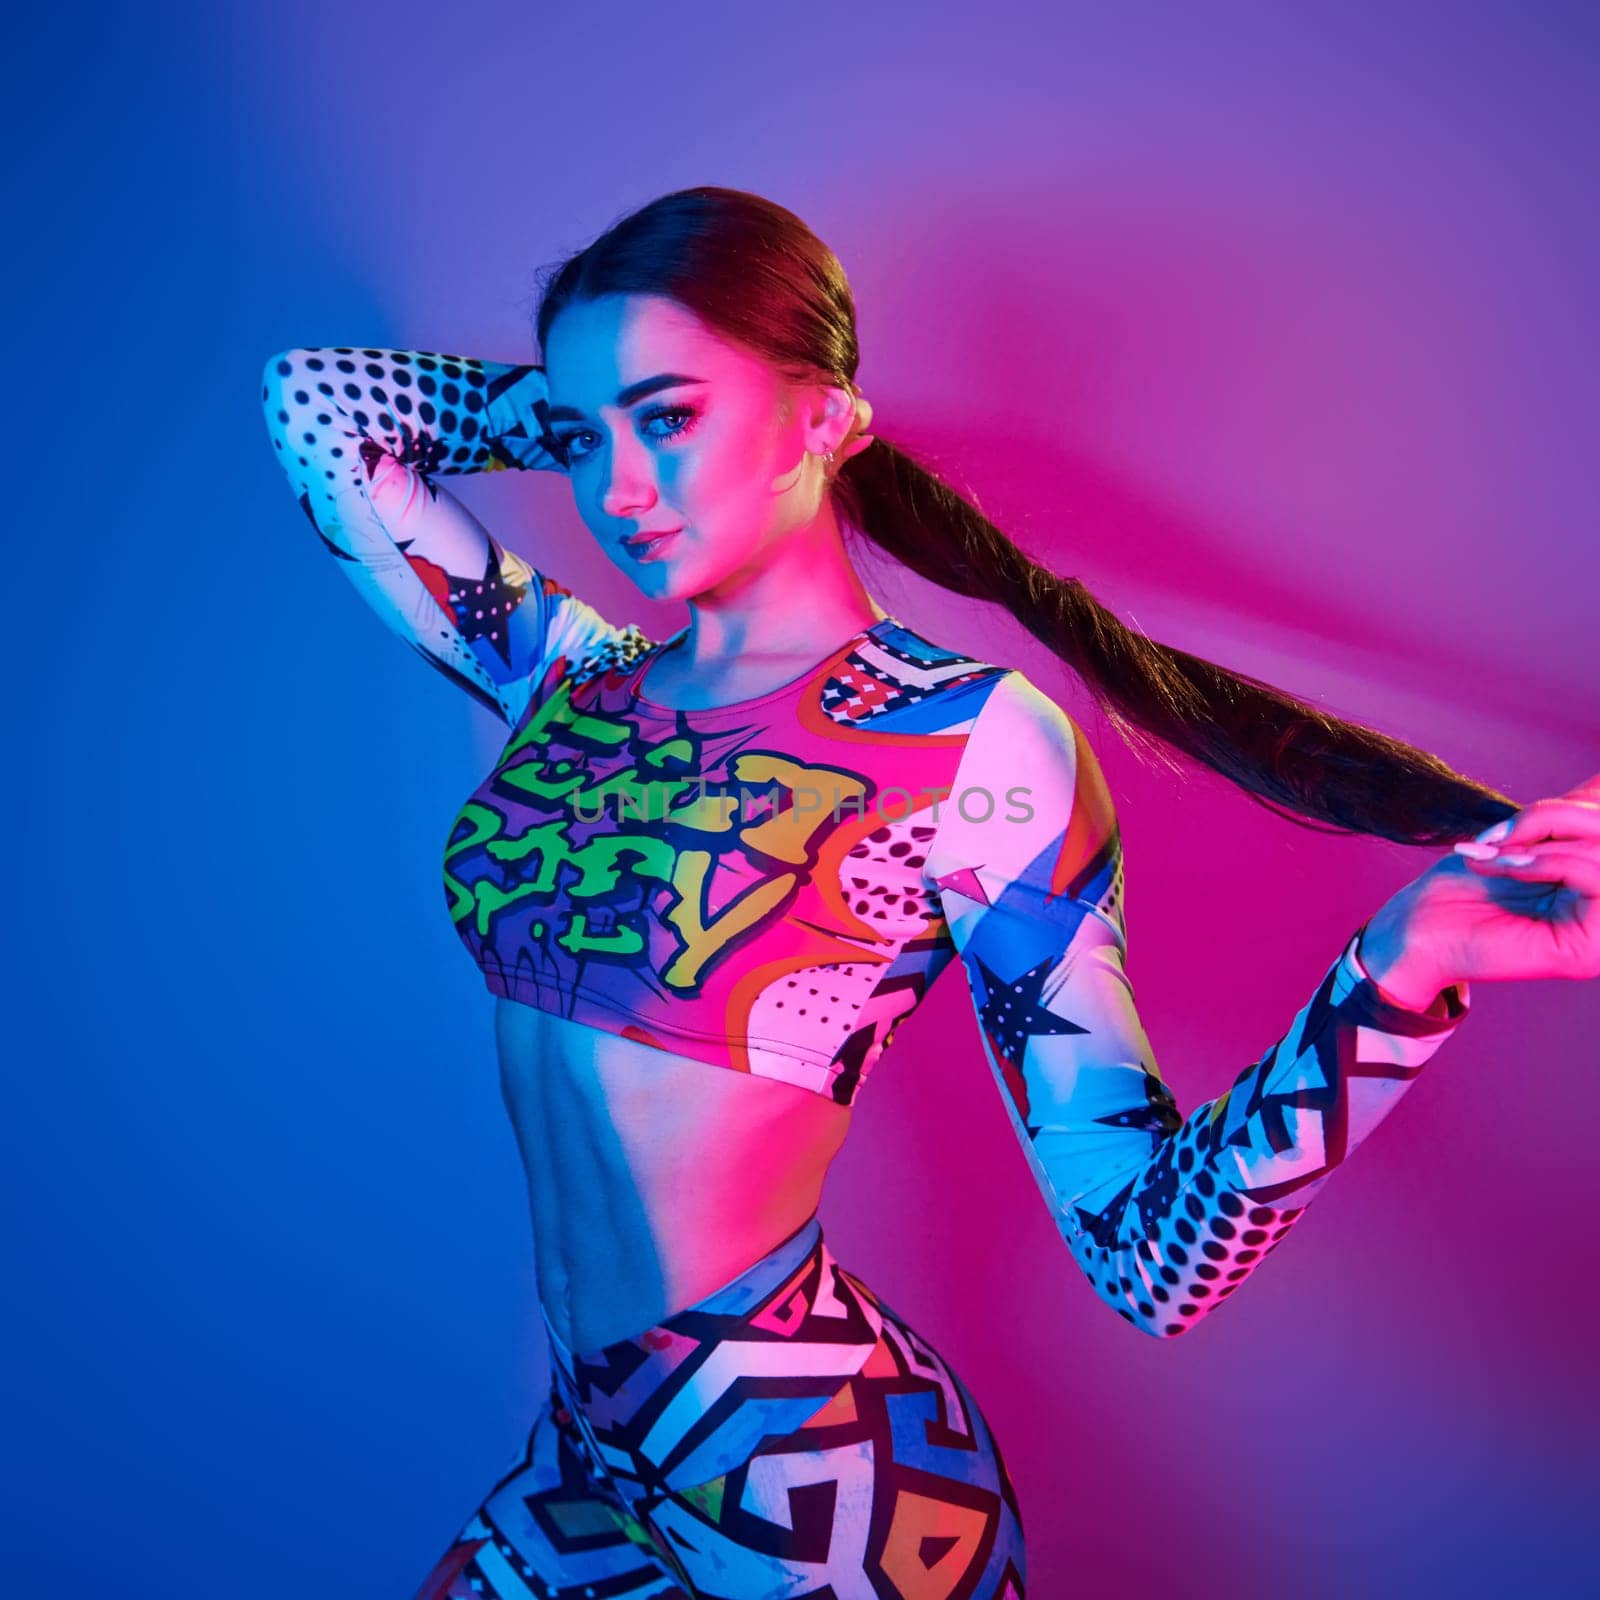 Fitness body type. Fashionable young woman standing in the studio with neon light.